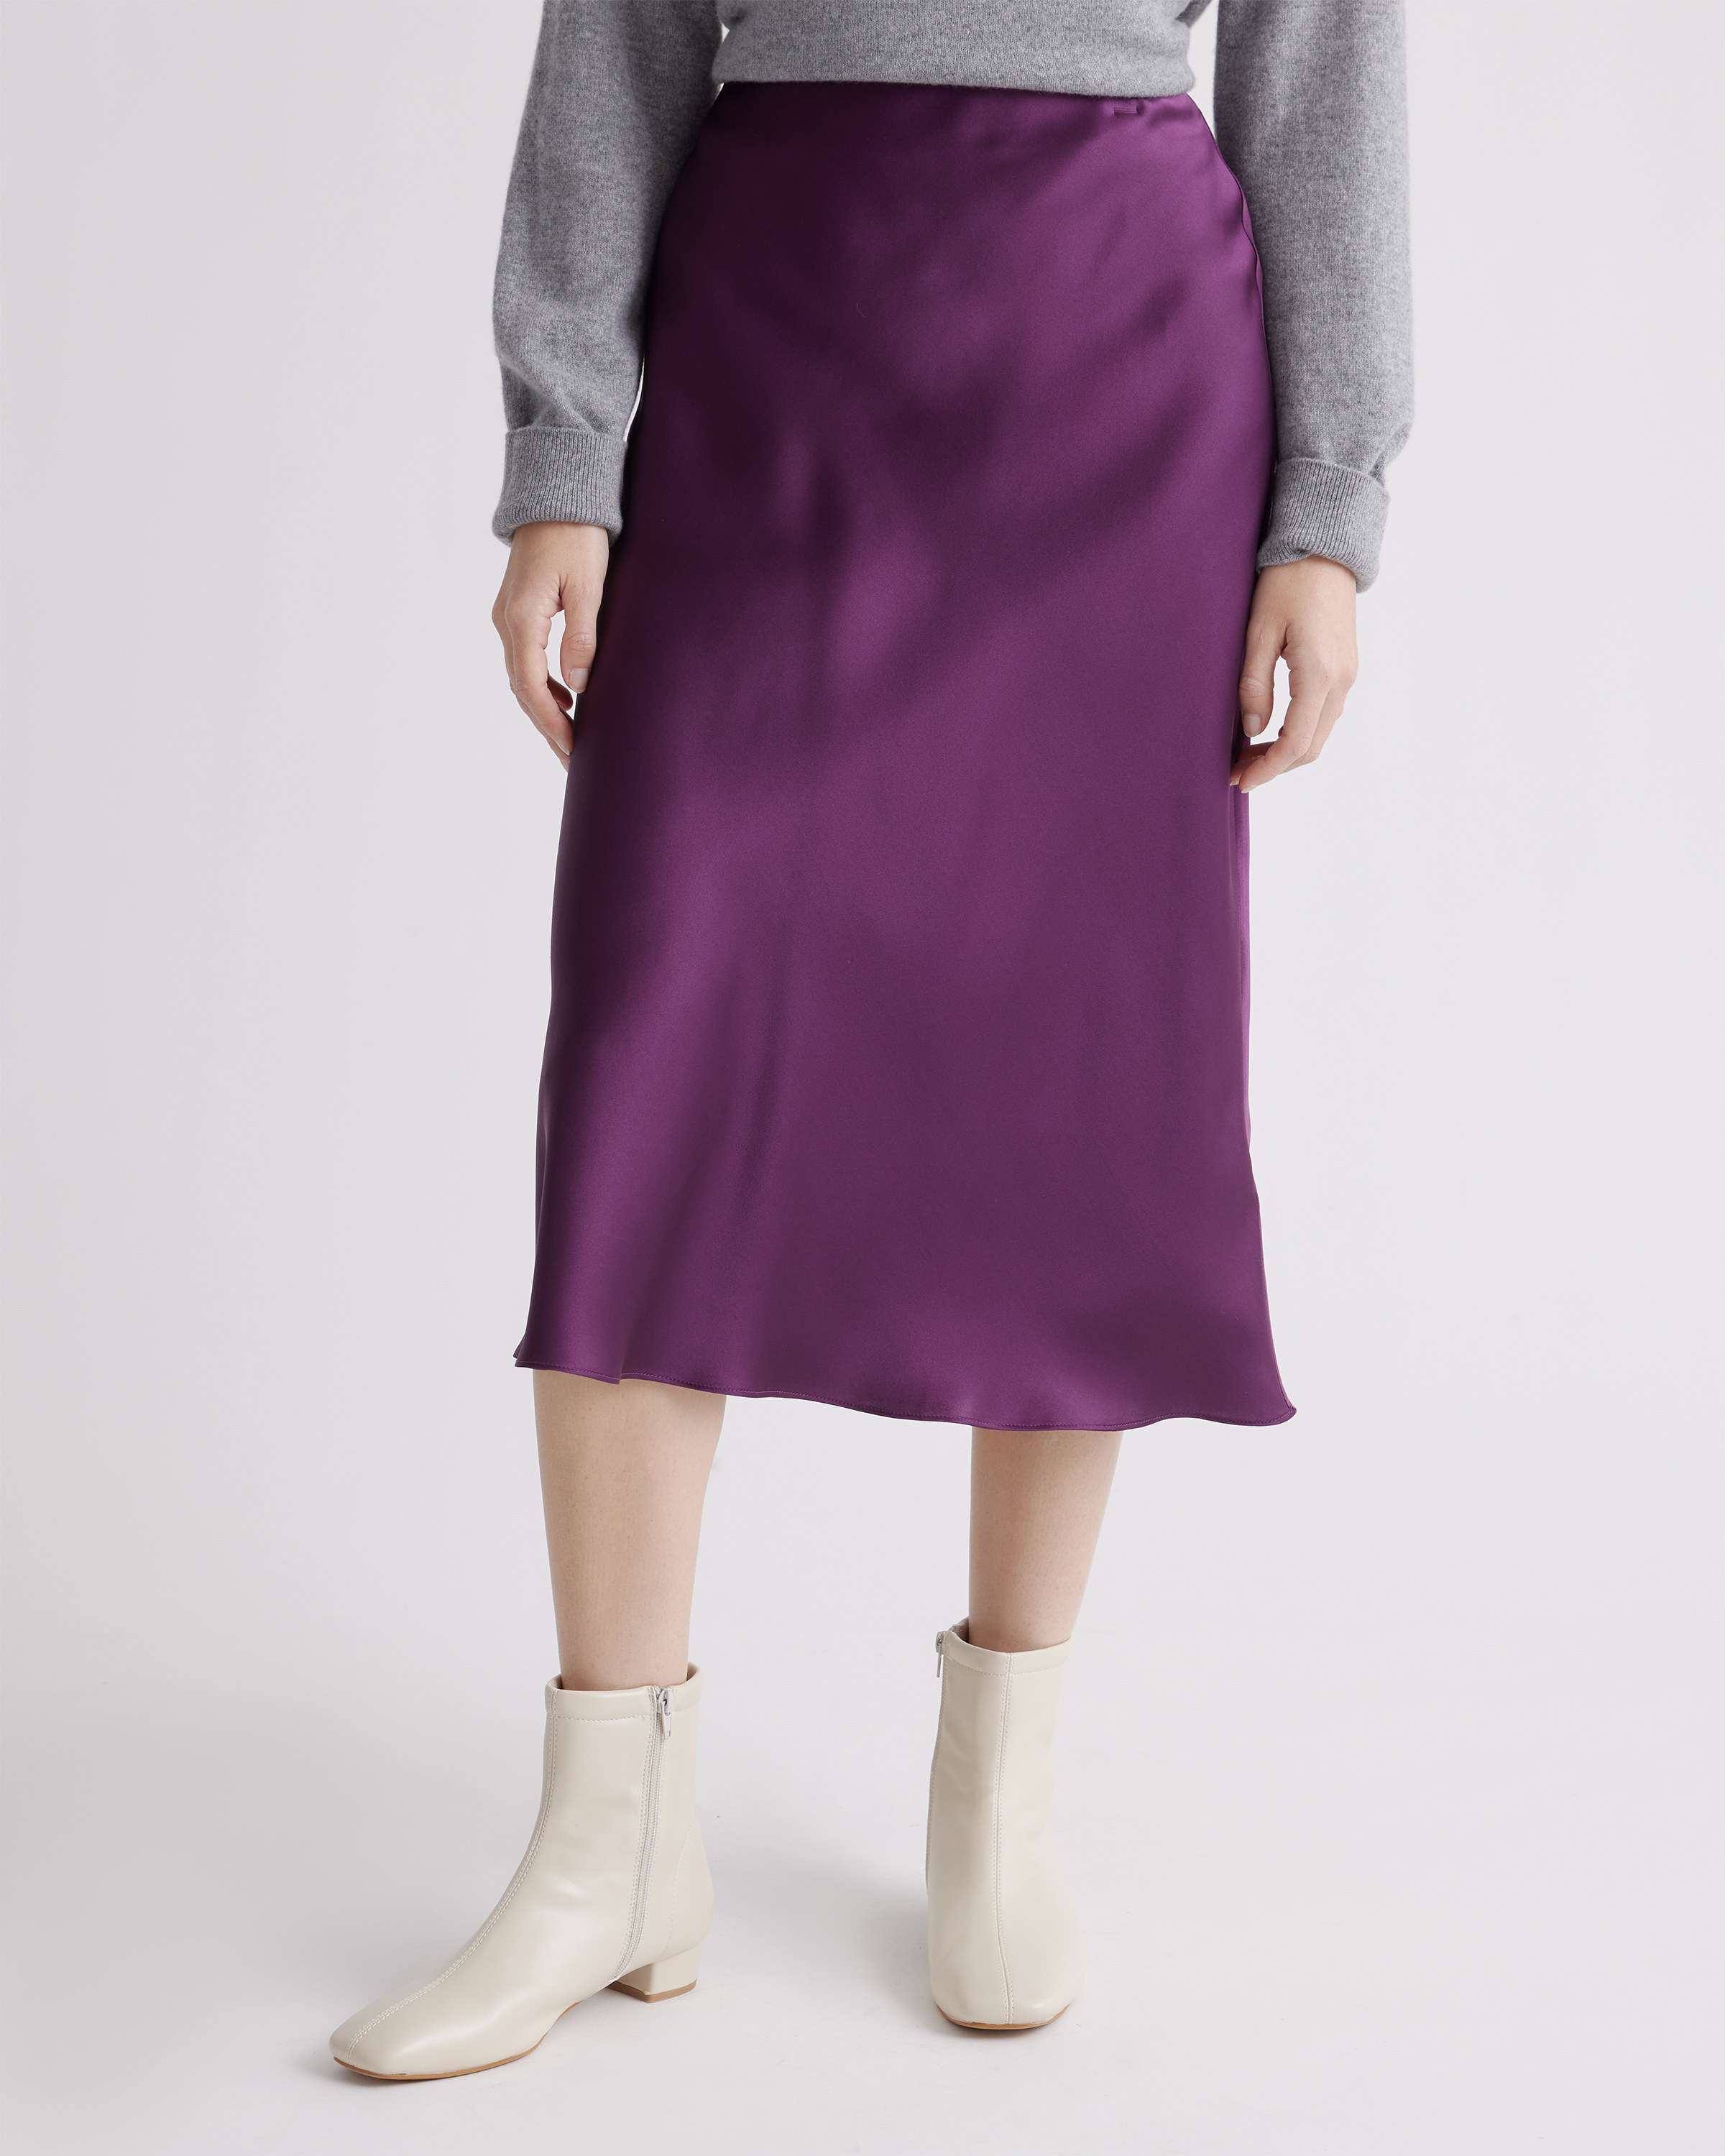 A model wearing a purple skirt with grey top and white shoes